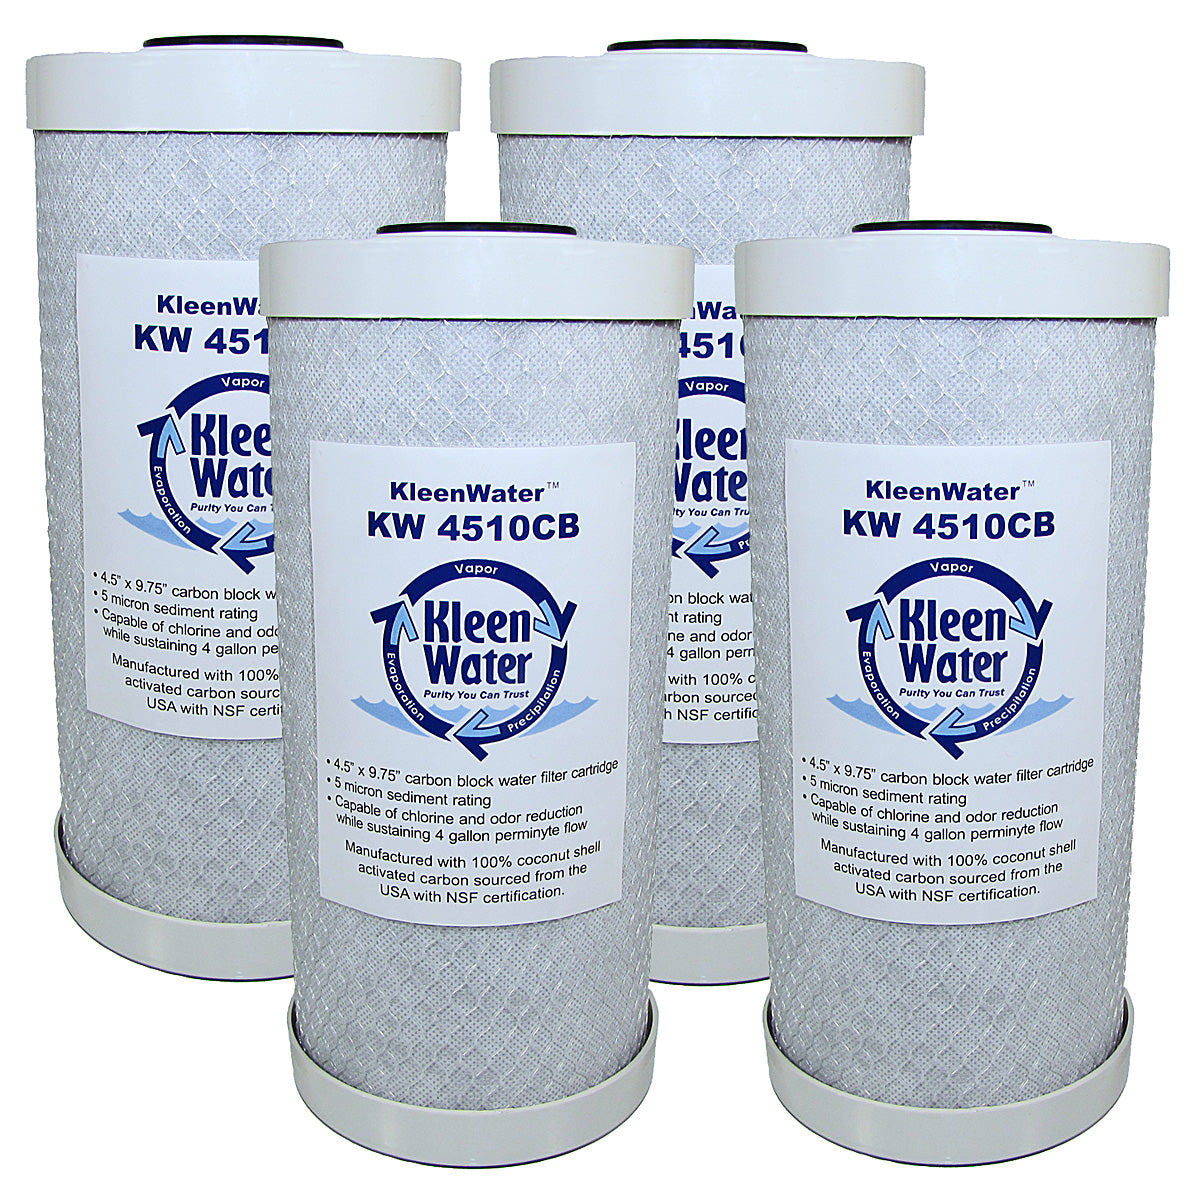 KW Activated Carbon Block Water Filter, 4.5 x 9.75 Inch, Qty 4 - Kleenwater